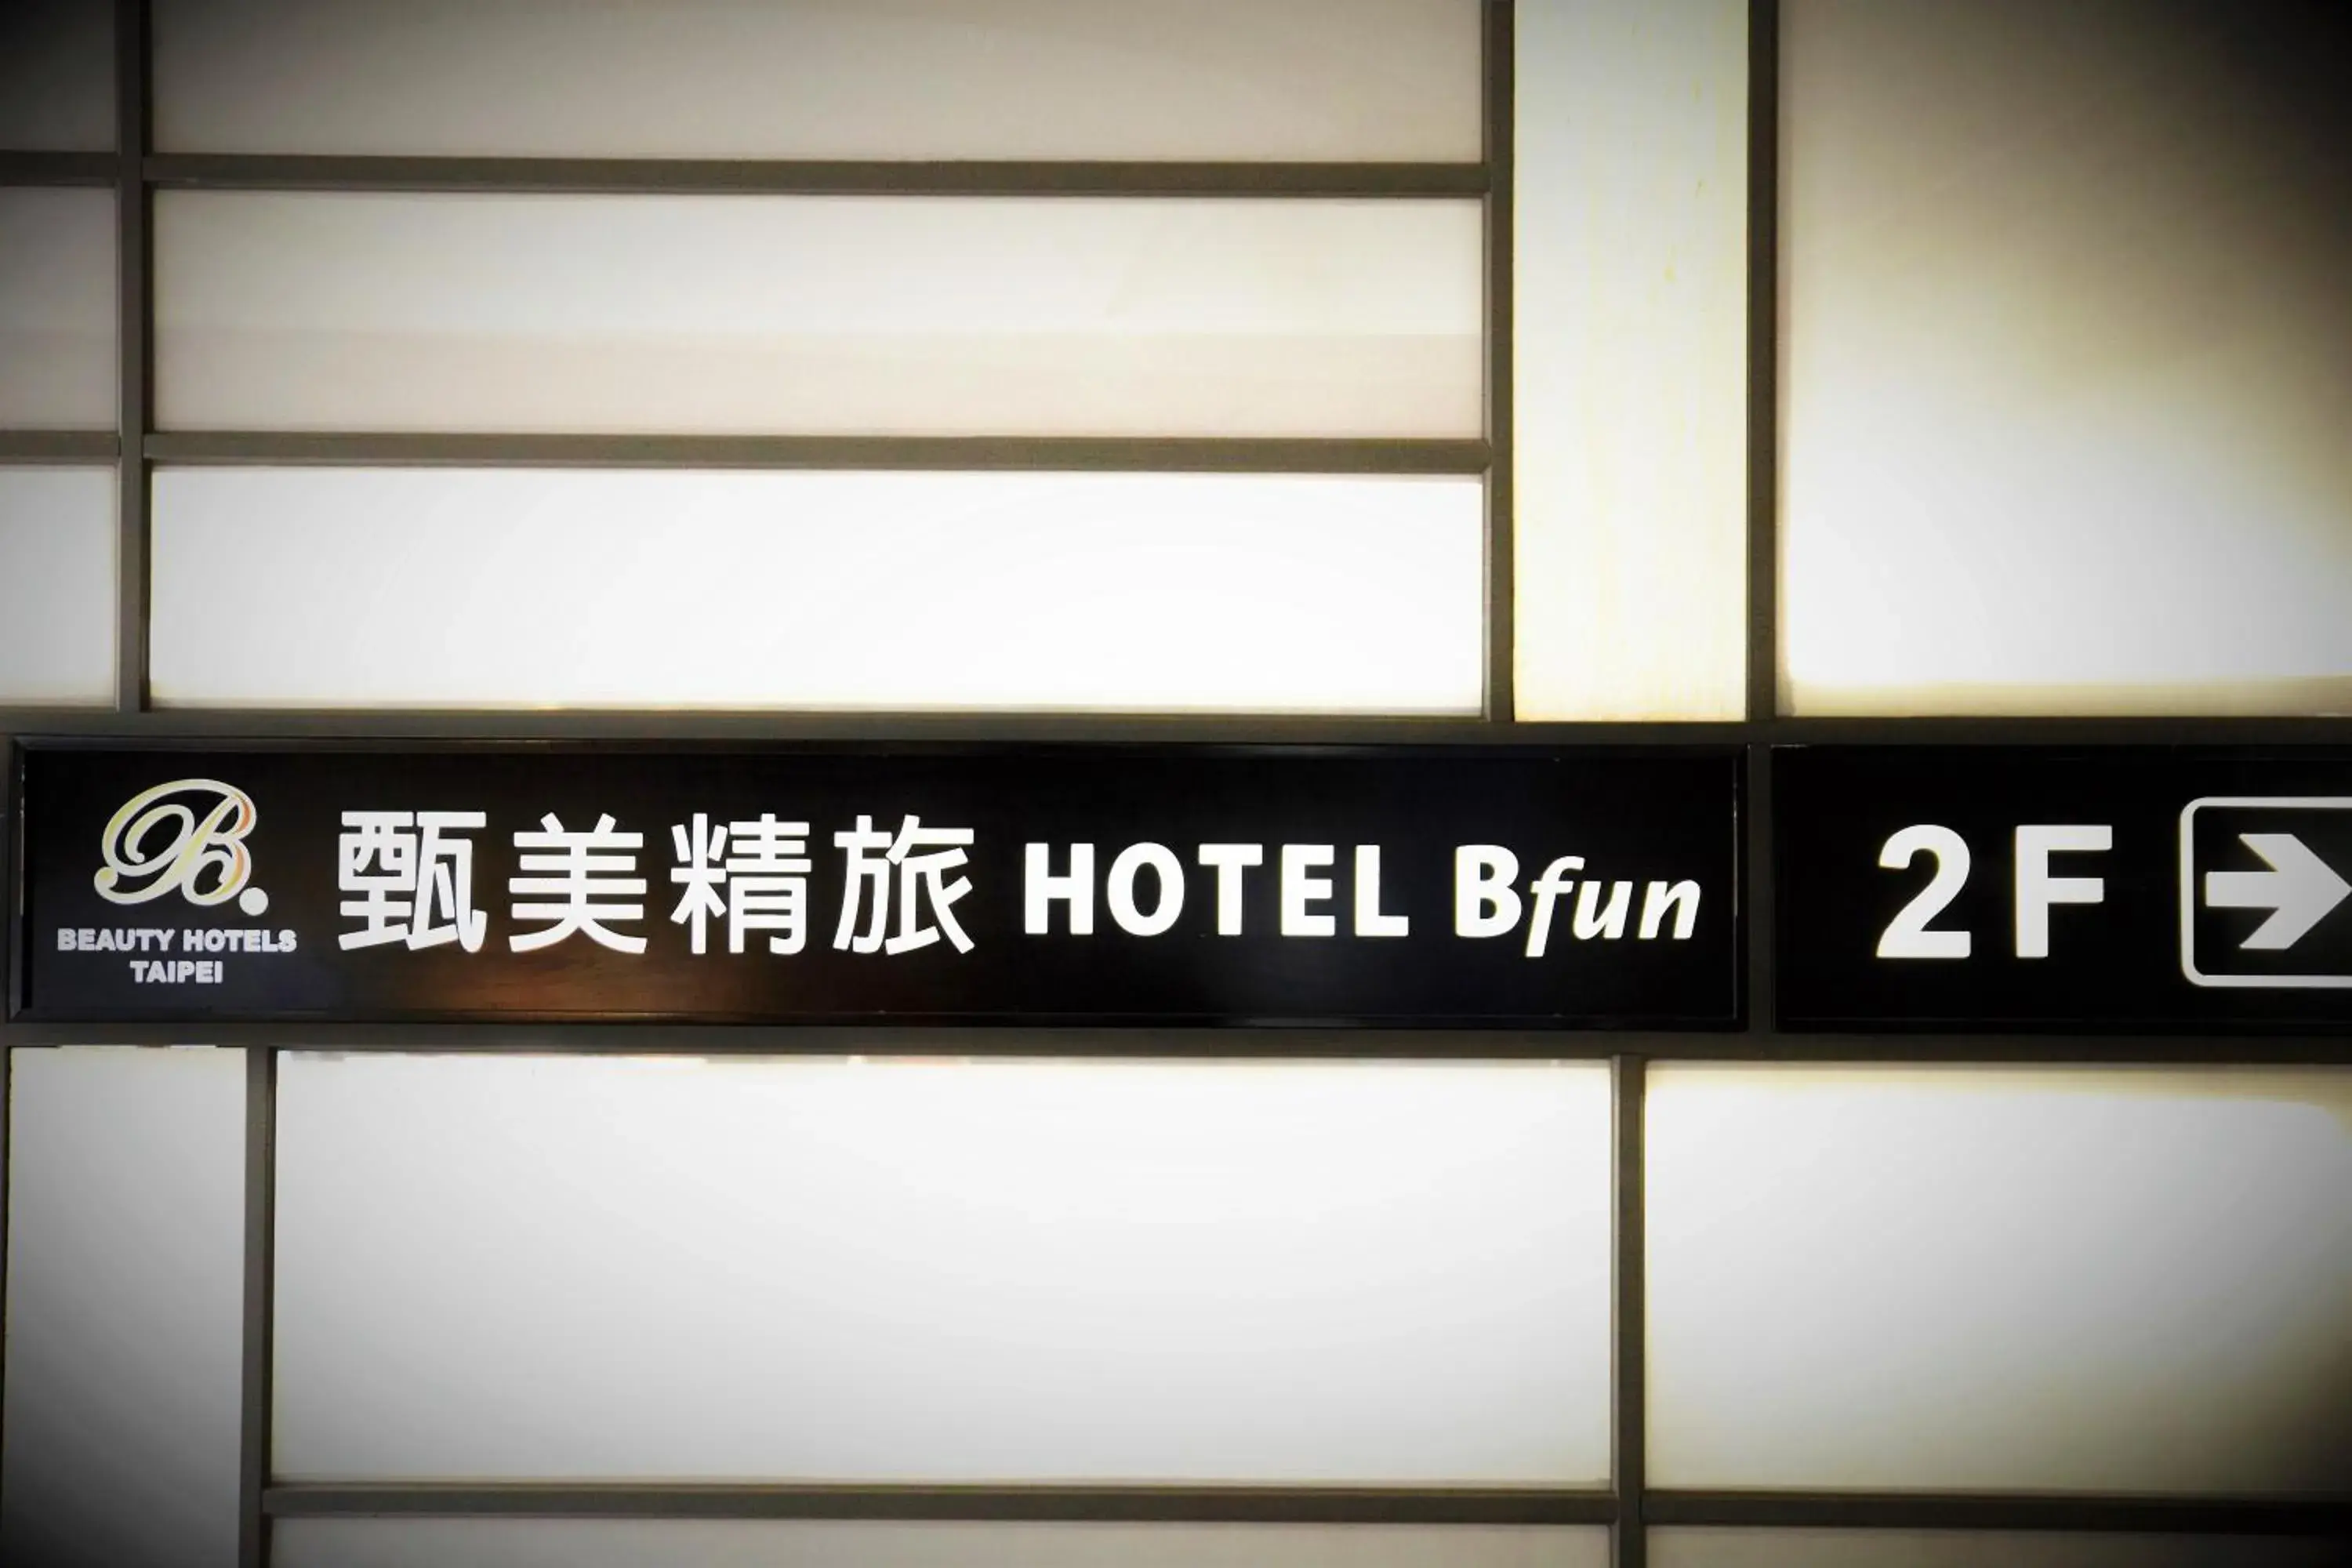 Property logo or sign in Beauty Hotels Taipei - Hotel Bfun